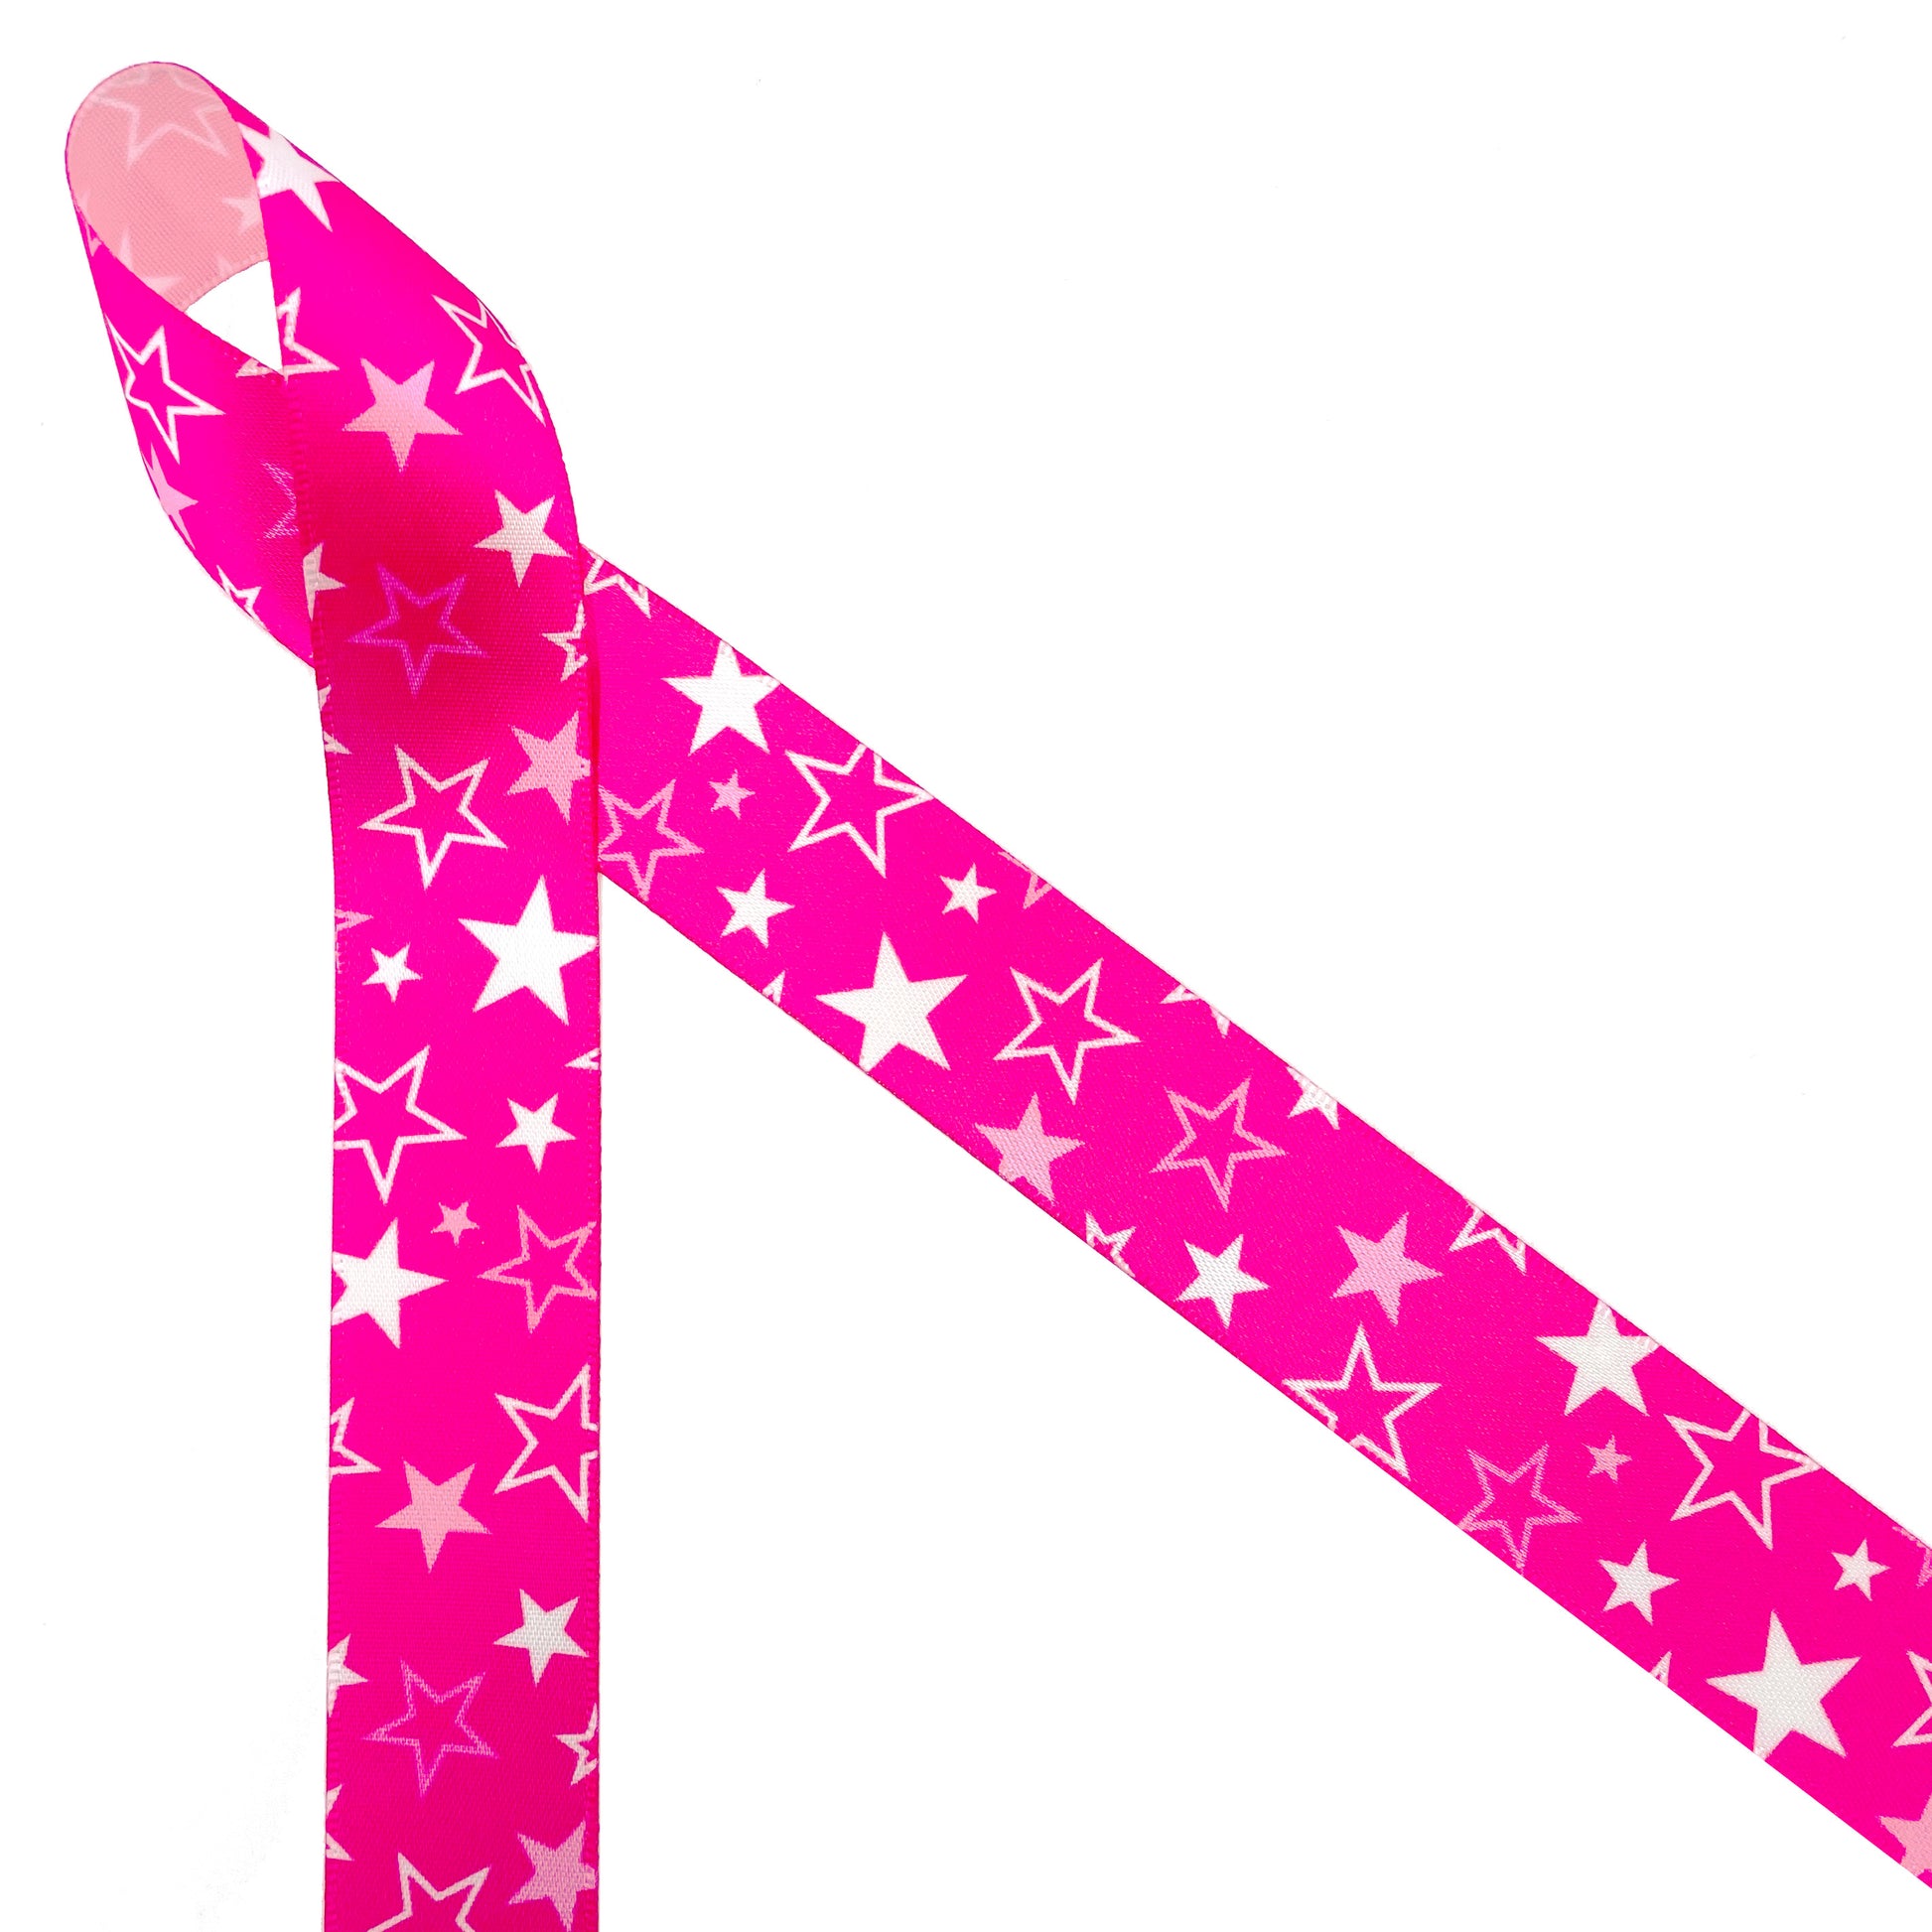 Hot pink ribbon with white stars Barbie inspired printed on 7/8 white